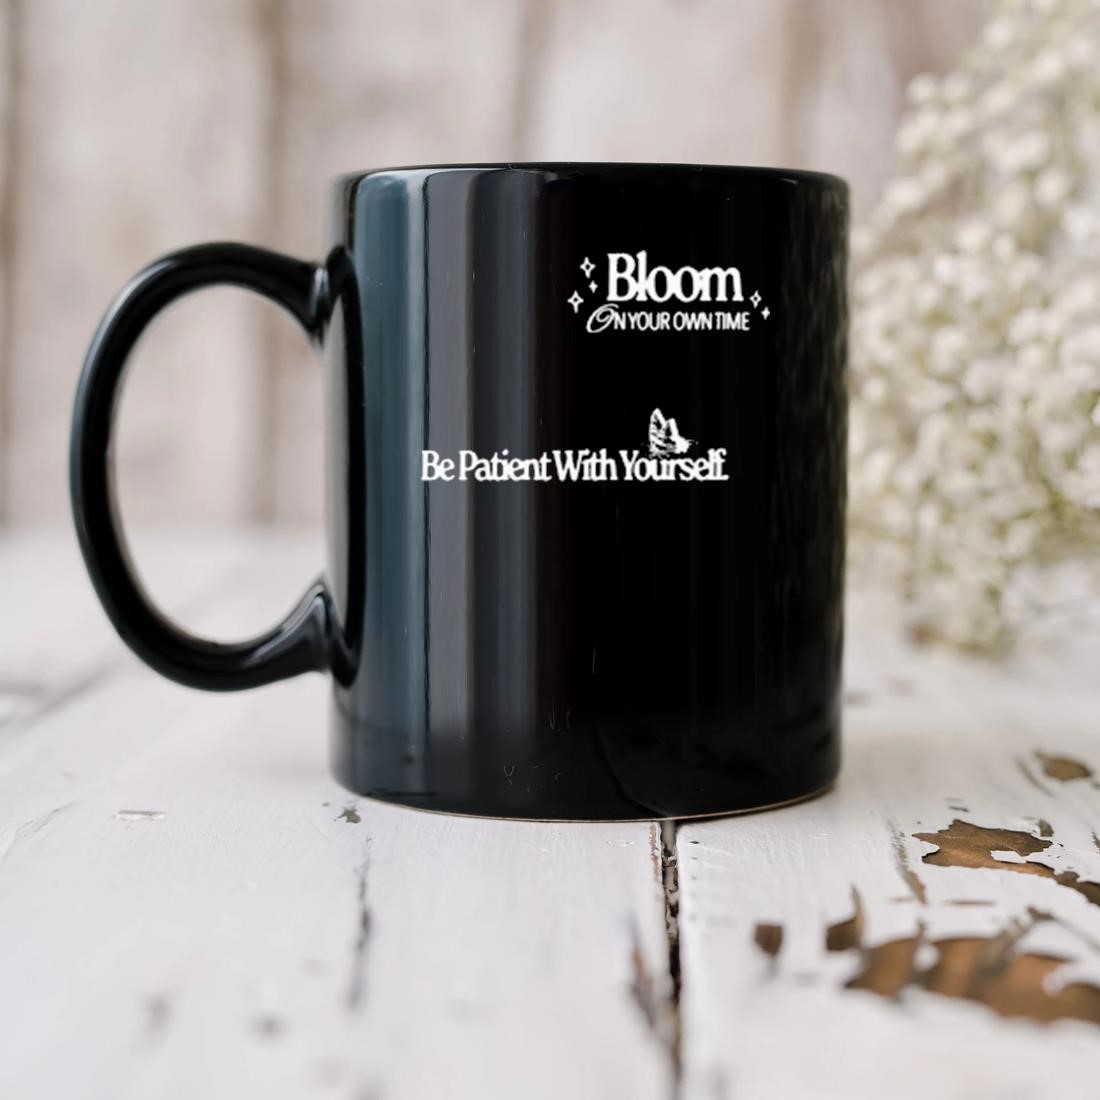 Bloom On Your Own Time Be Patient With Yourself Mug biu.jpg